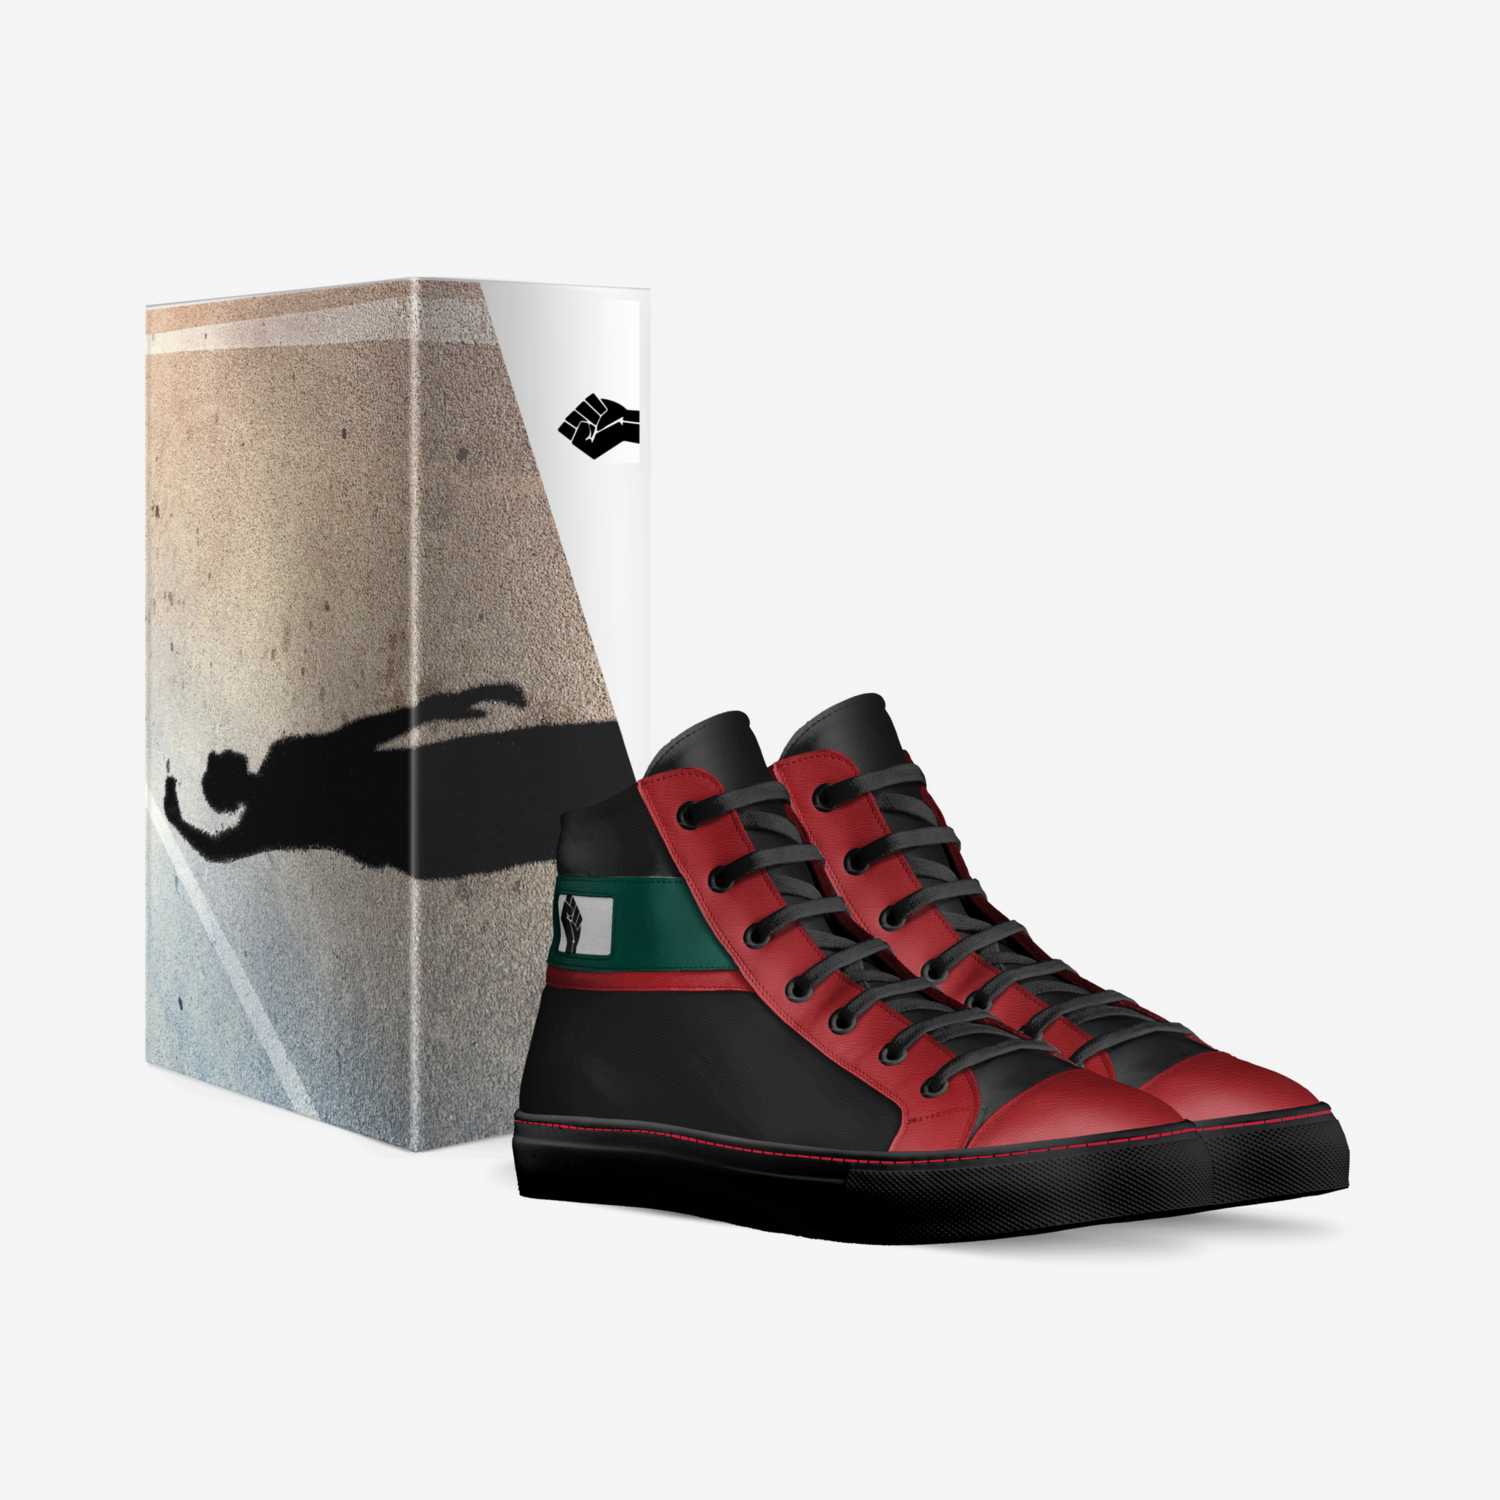 Freedom Fighter custom made in Italy shoes by Jay Rene | Box view